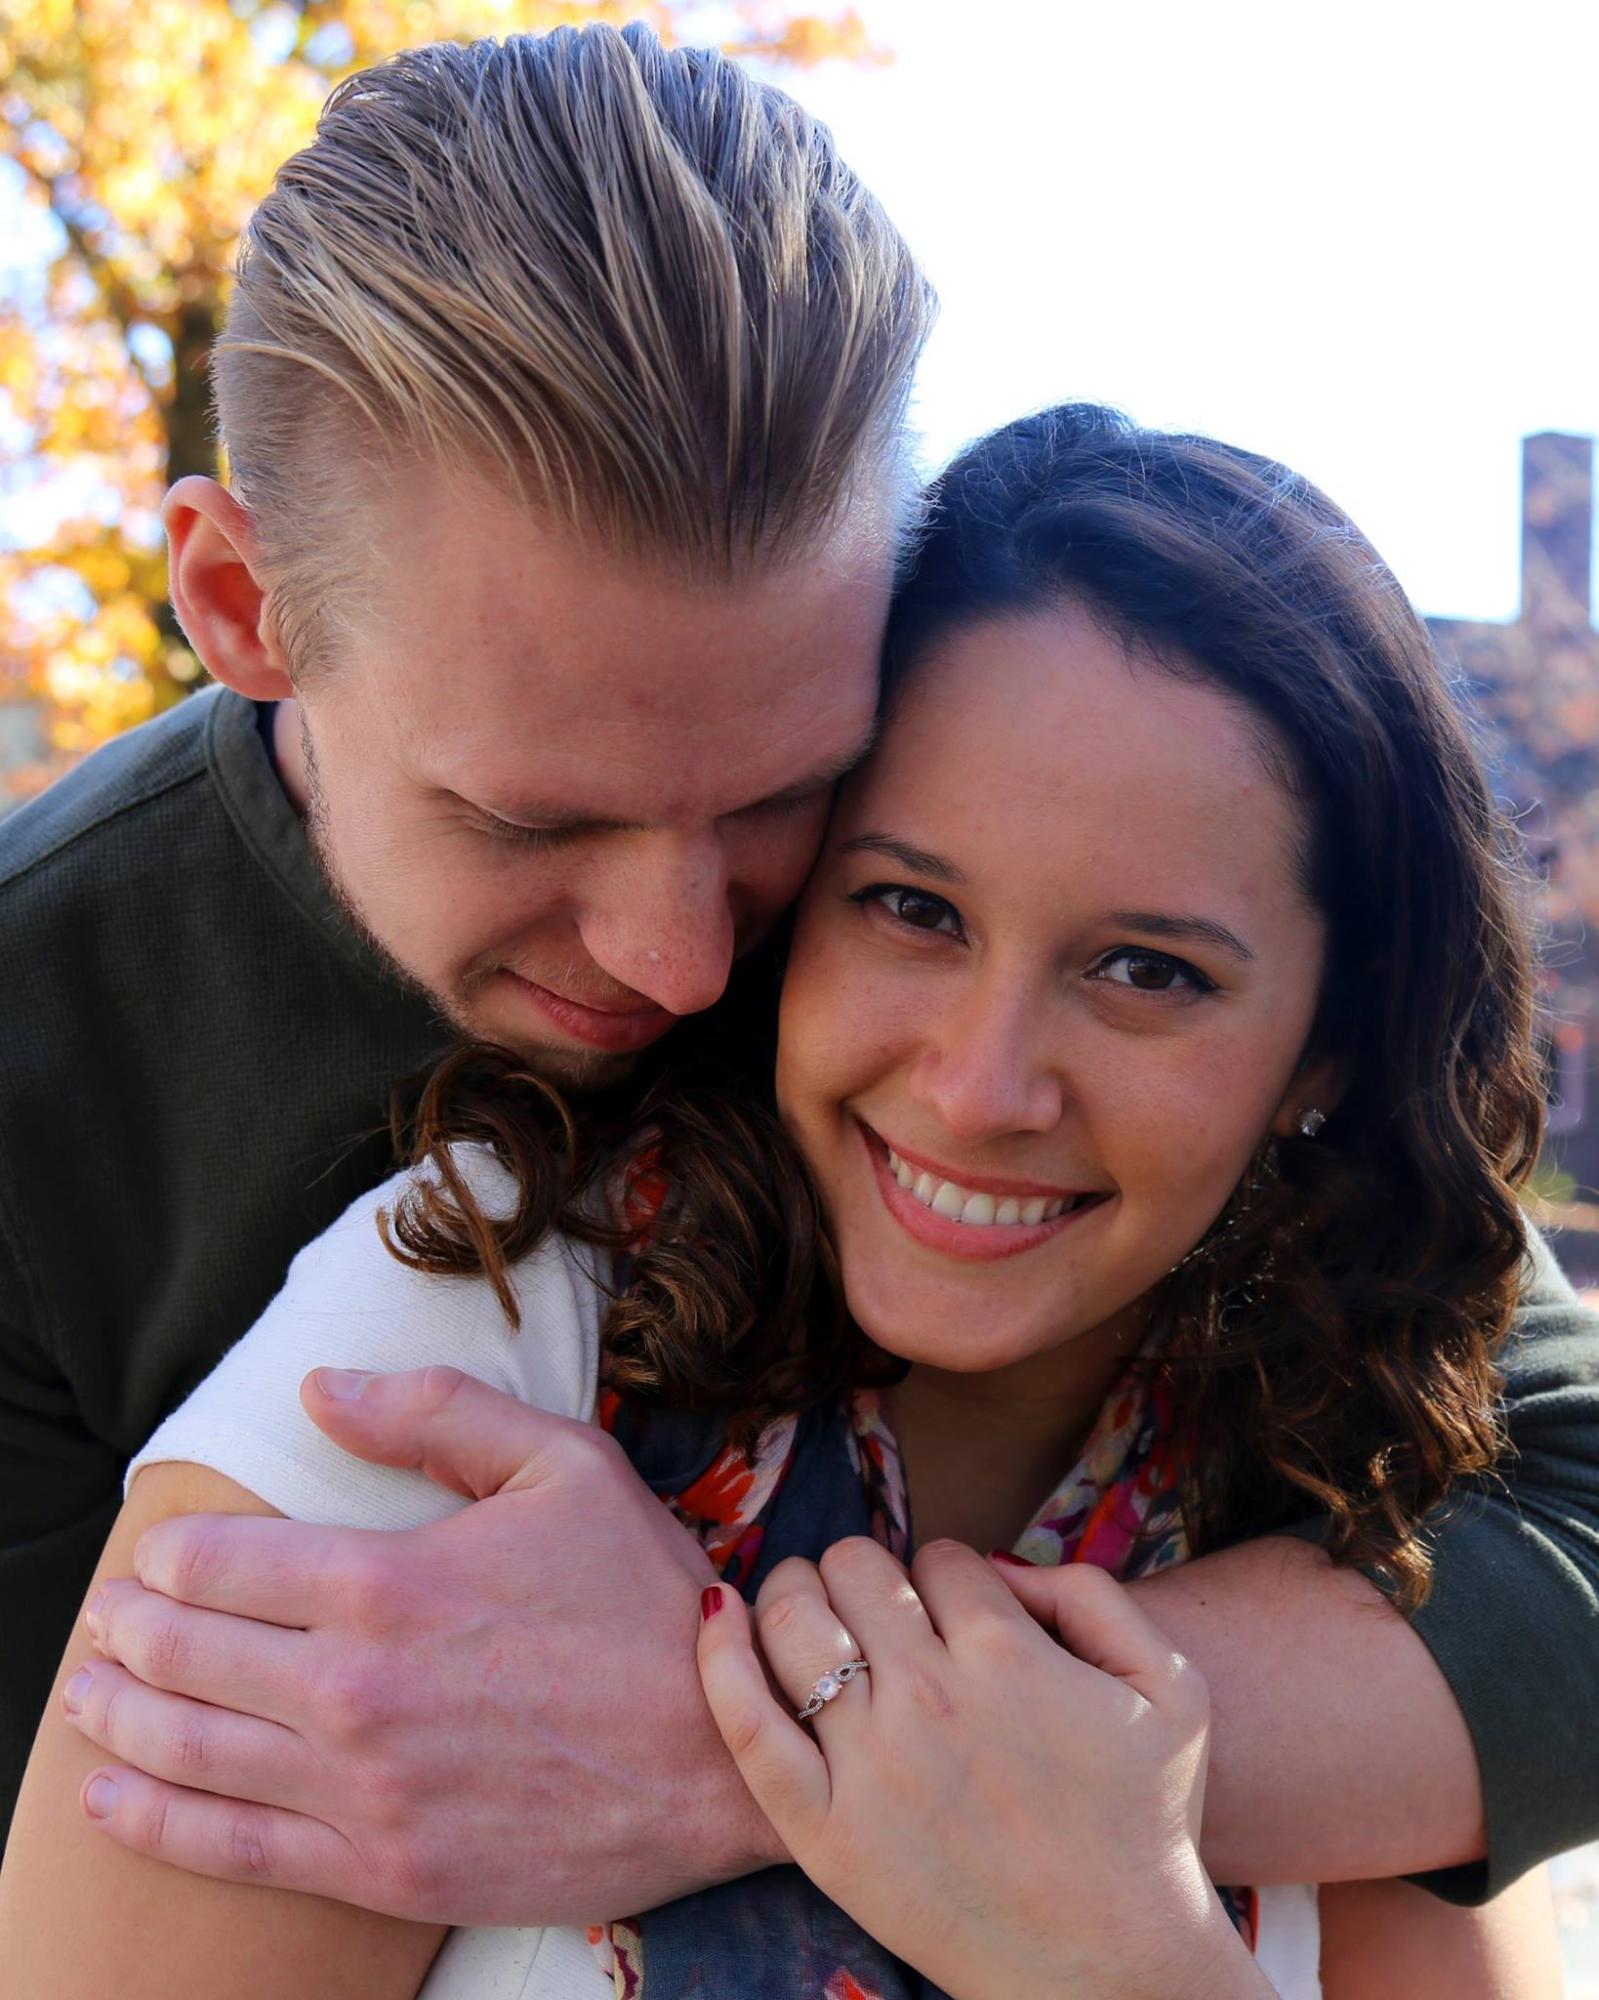 Bucks County and Philadelphia Engagement Portaits sessions. Book your proposal with a photographer to capture the memory. Photography by Angel C. at Tylerstar